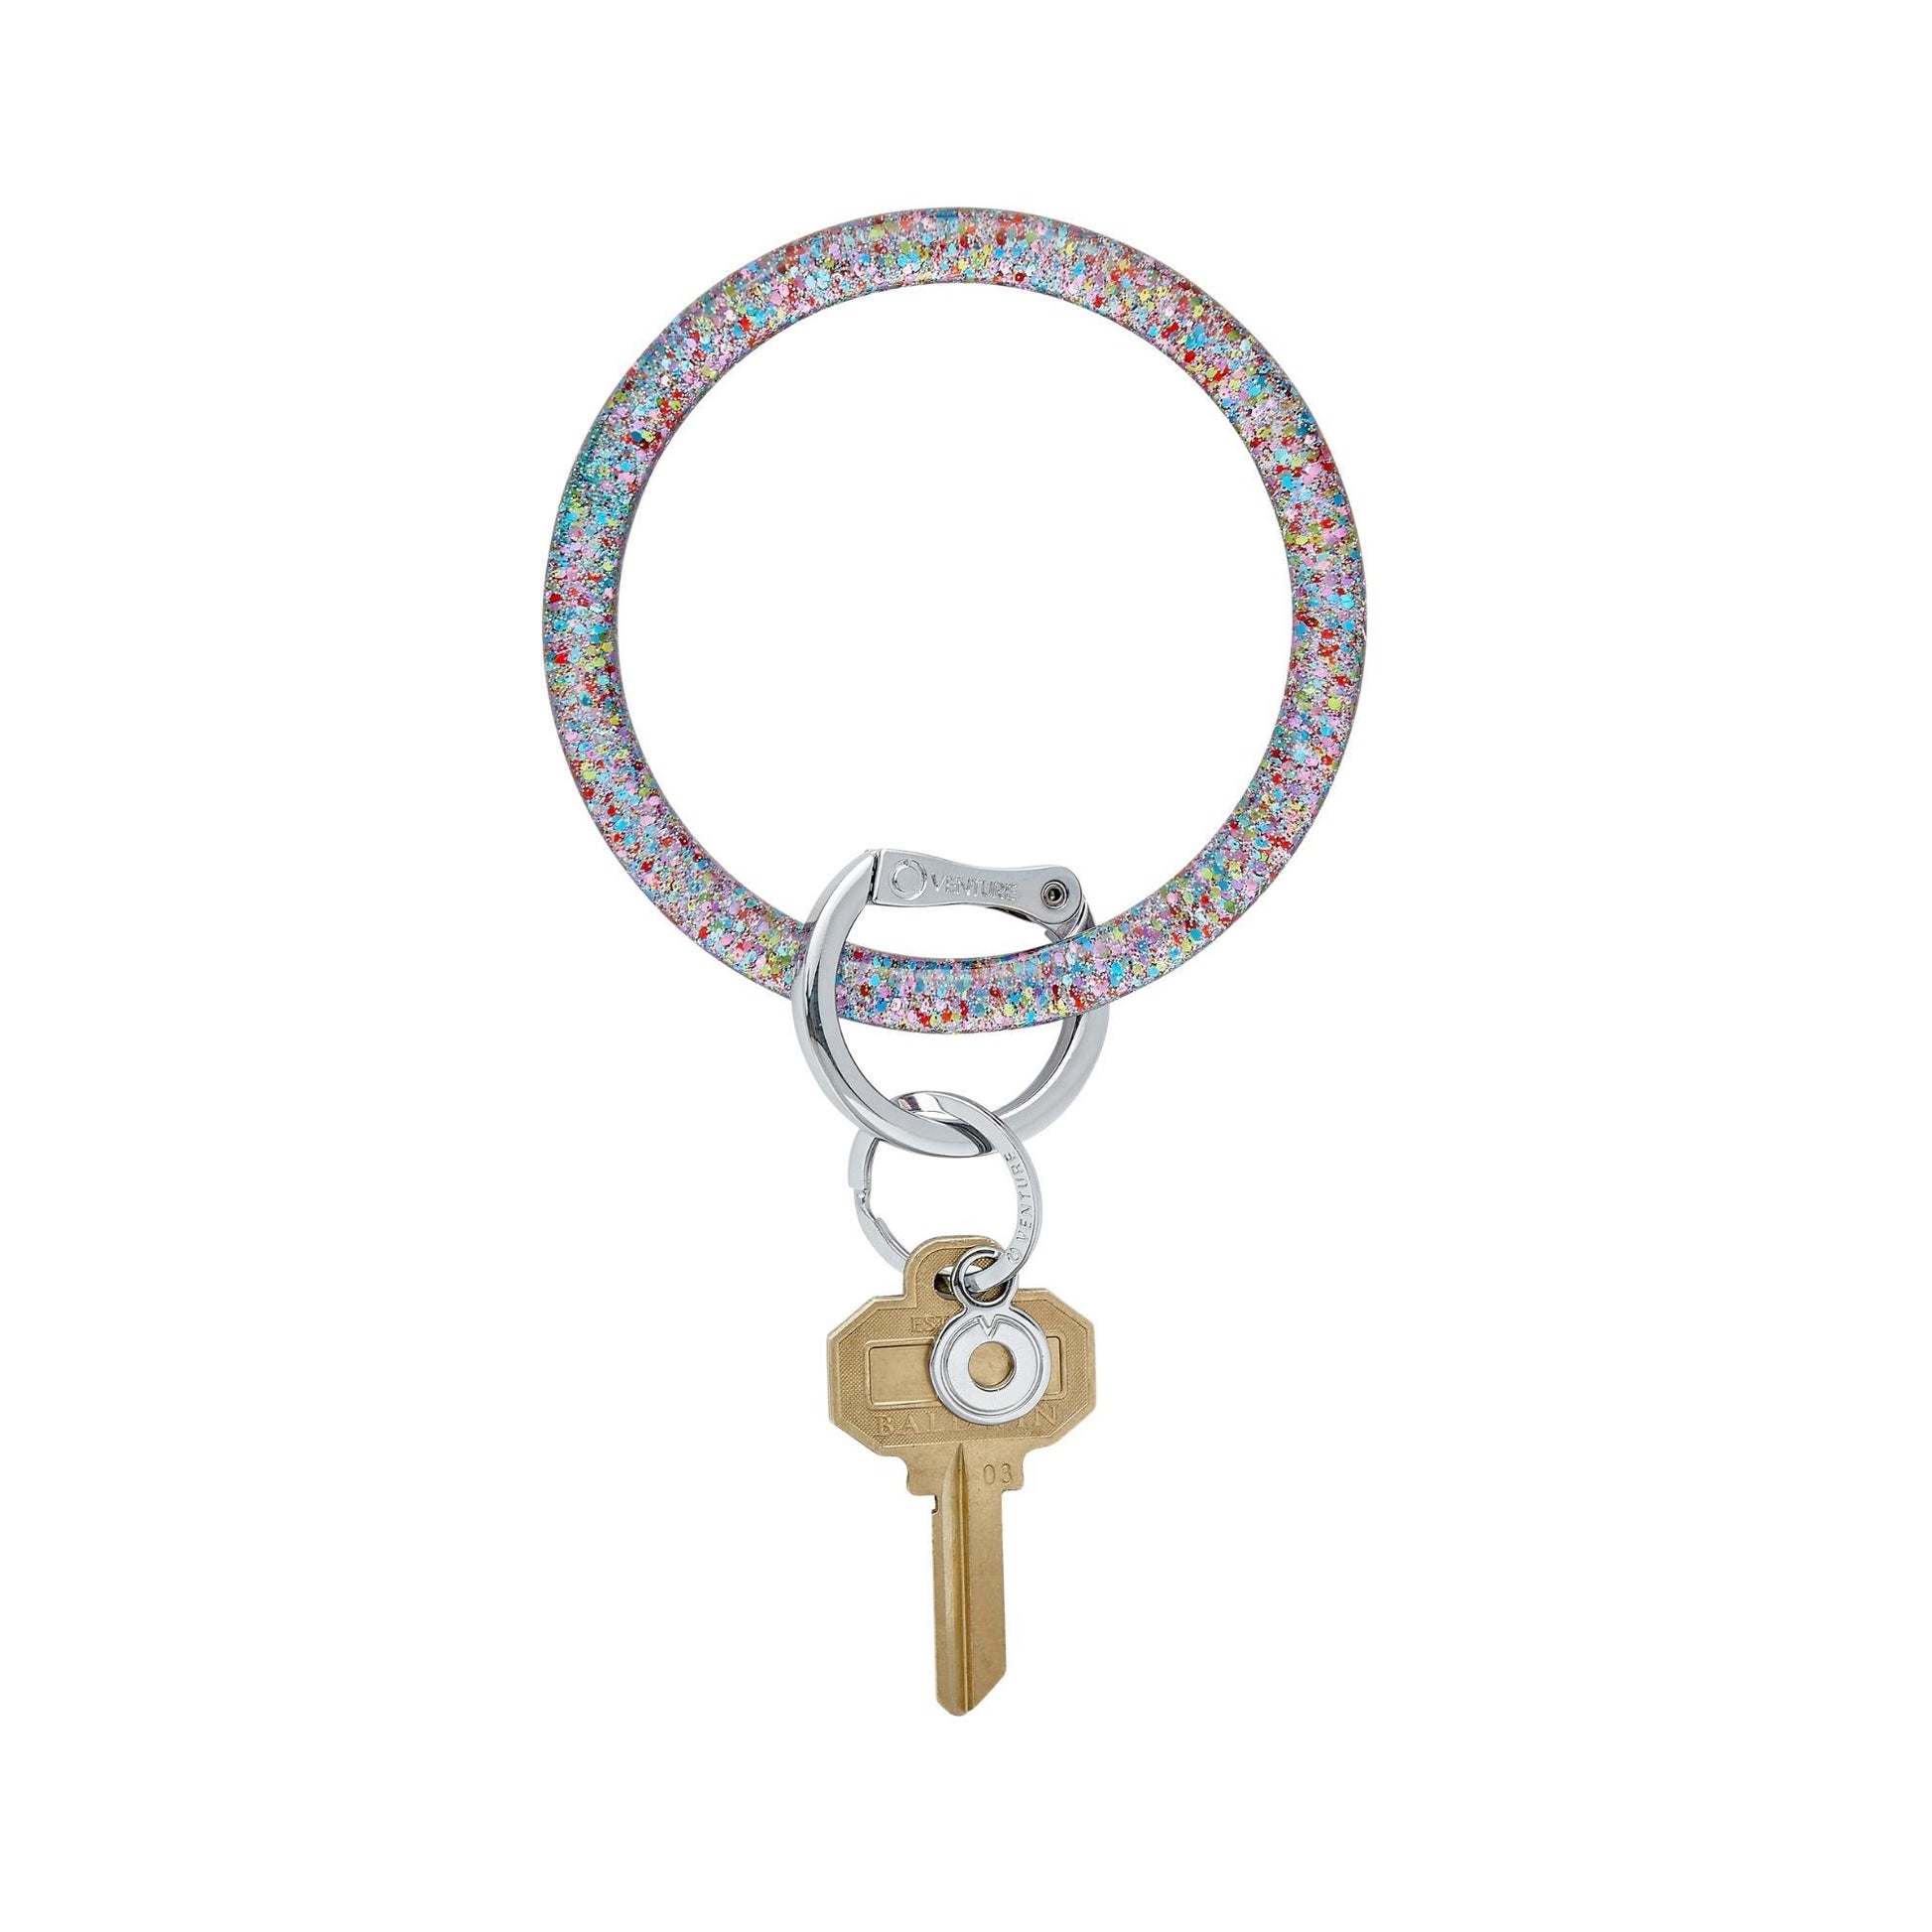 Big O Key Ring in Resin material with sparkly glitter confetti that is multi colored.